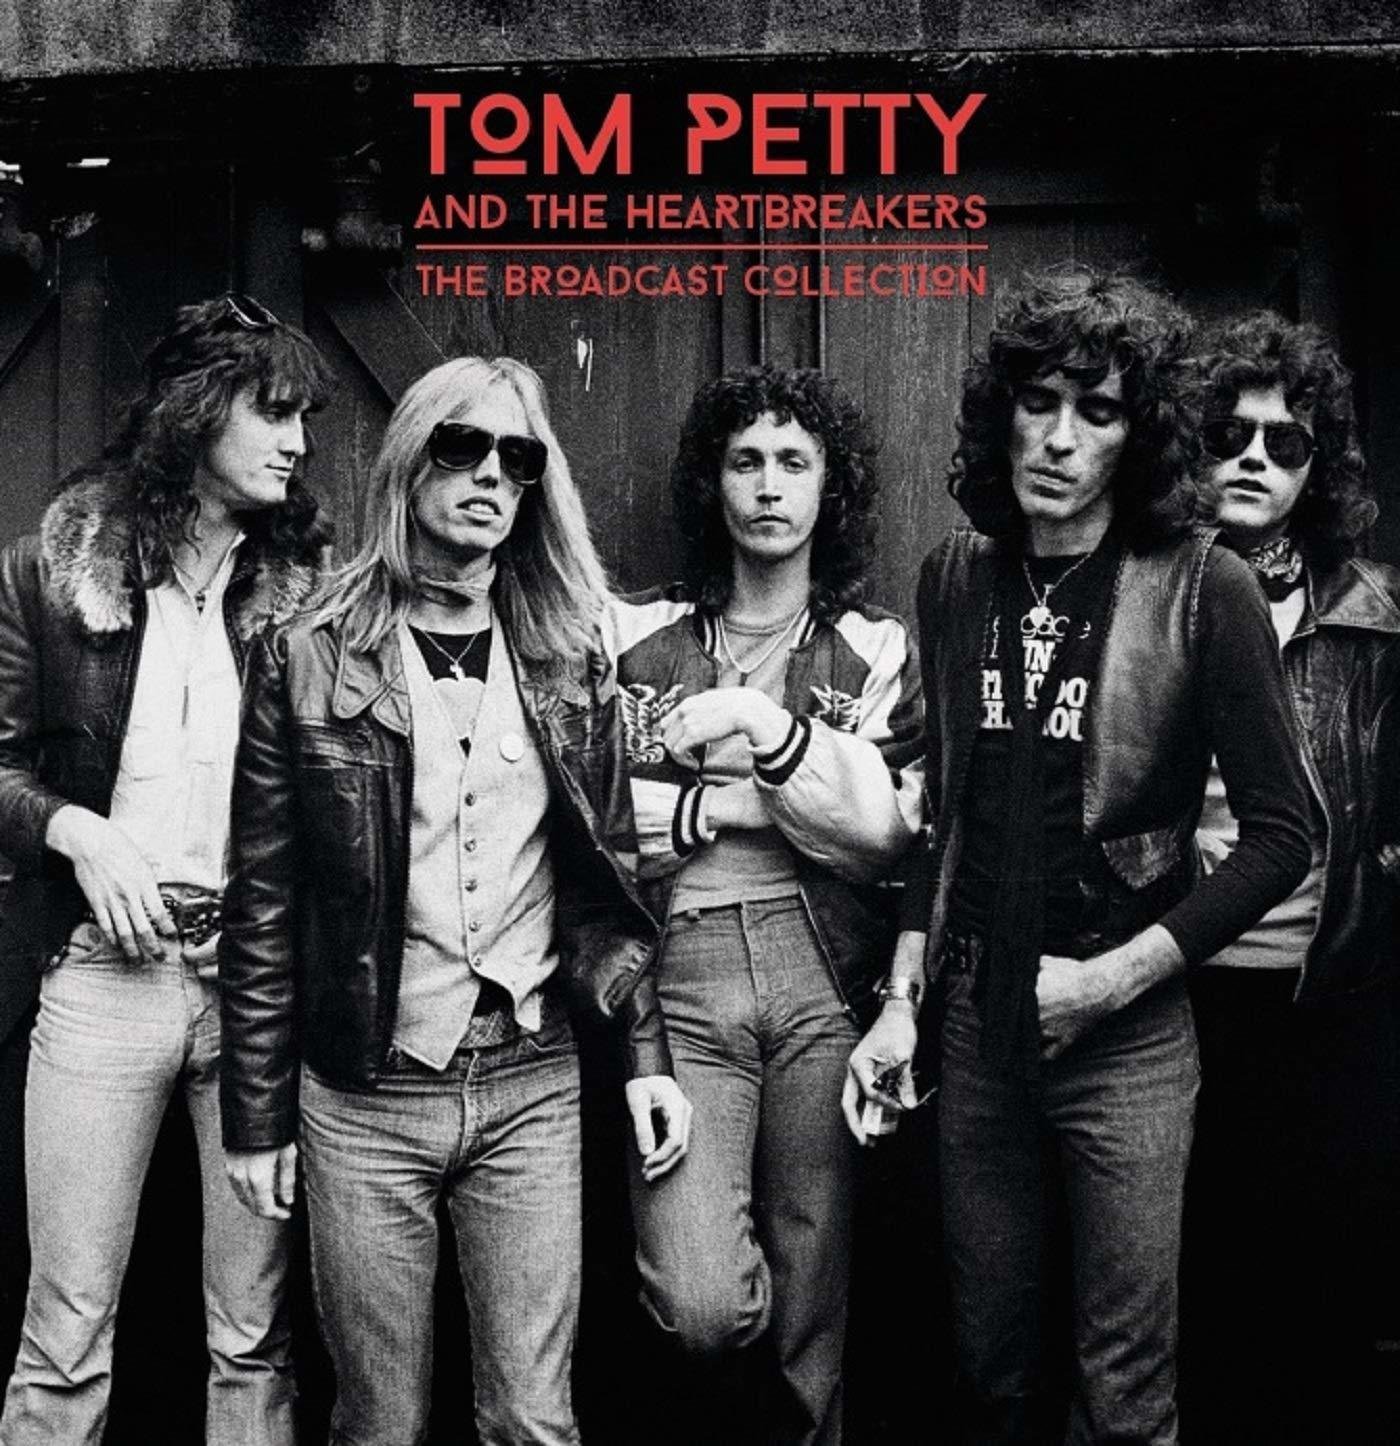 Disco in vinile Tom Petty - The Broadcast Collection (3 LP)